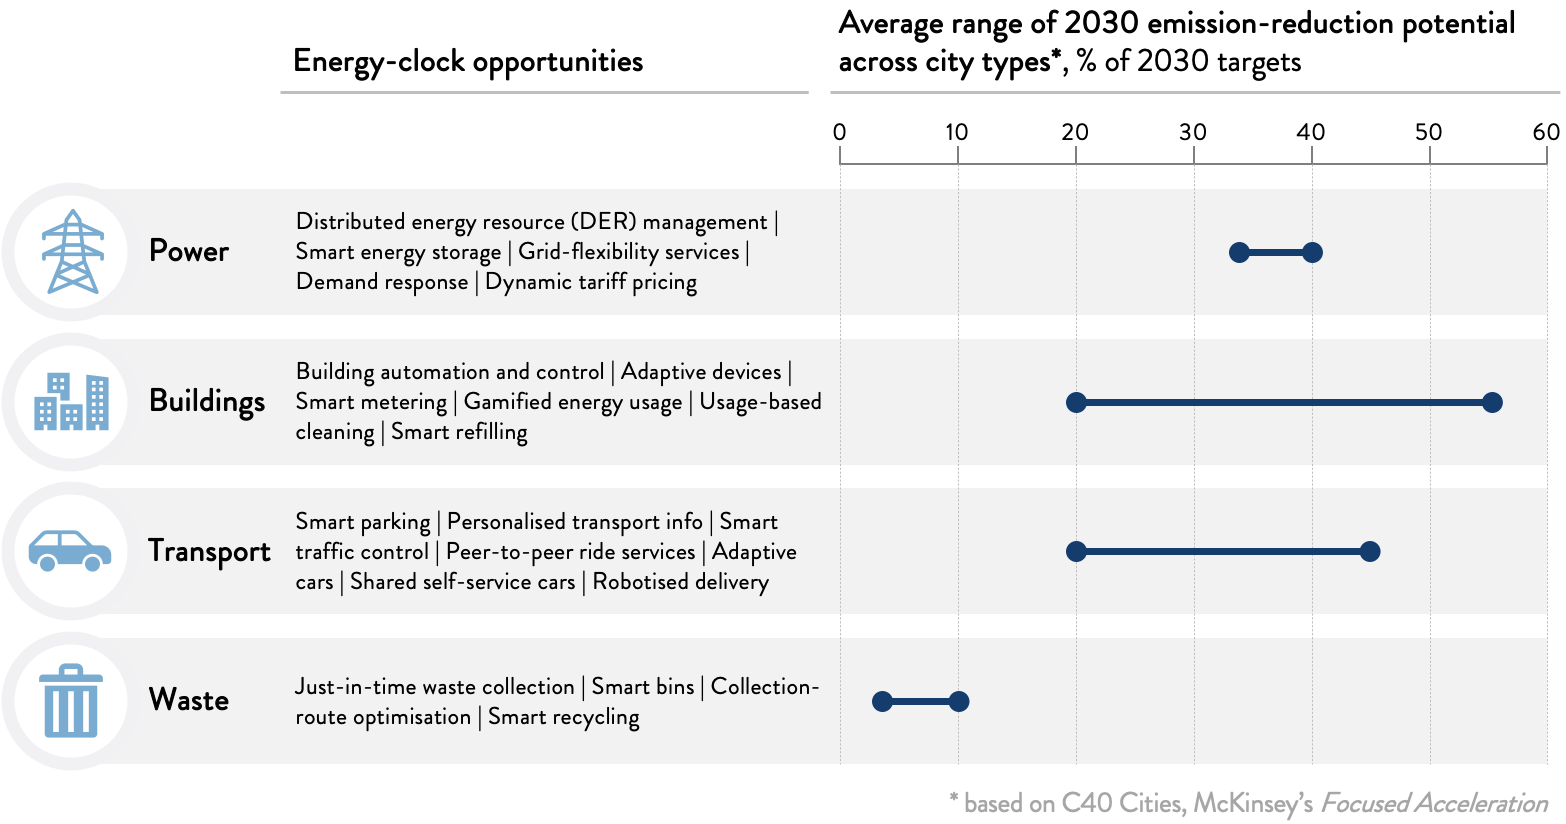 Figure 3 – Opportunities for reducing emissions with smart technologies enabled by energy clocks